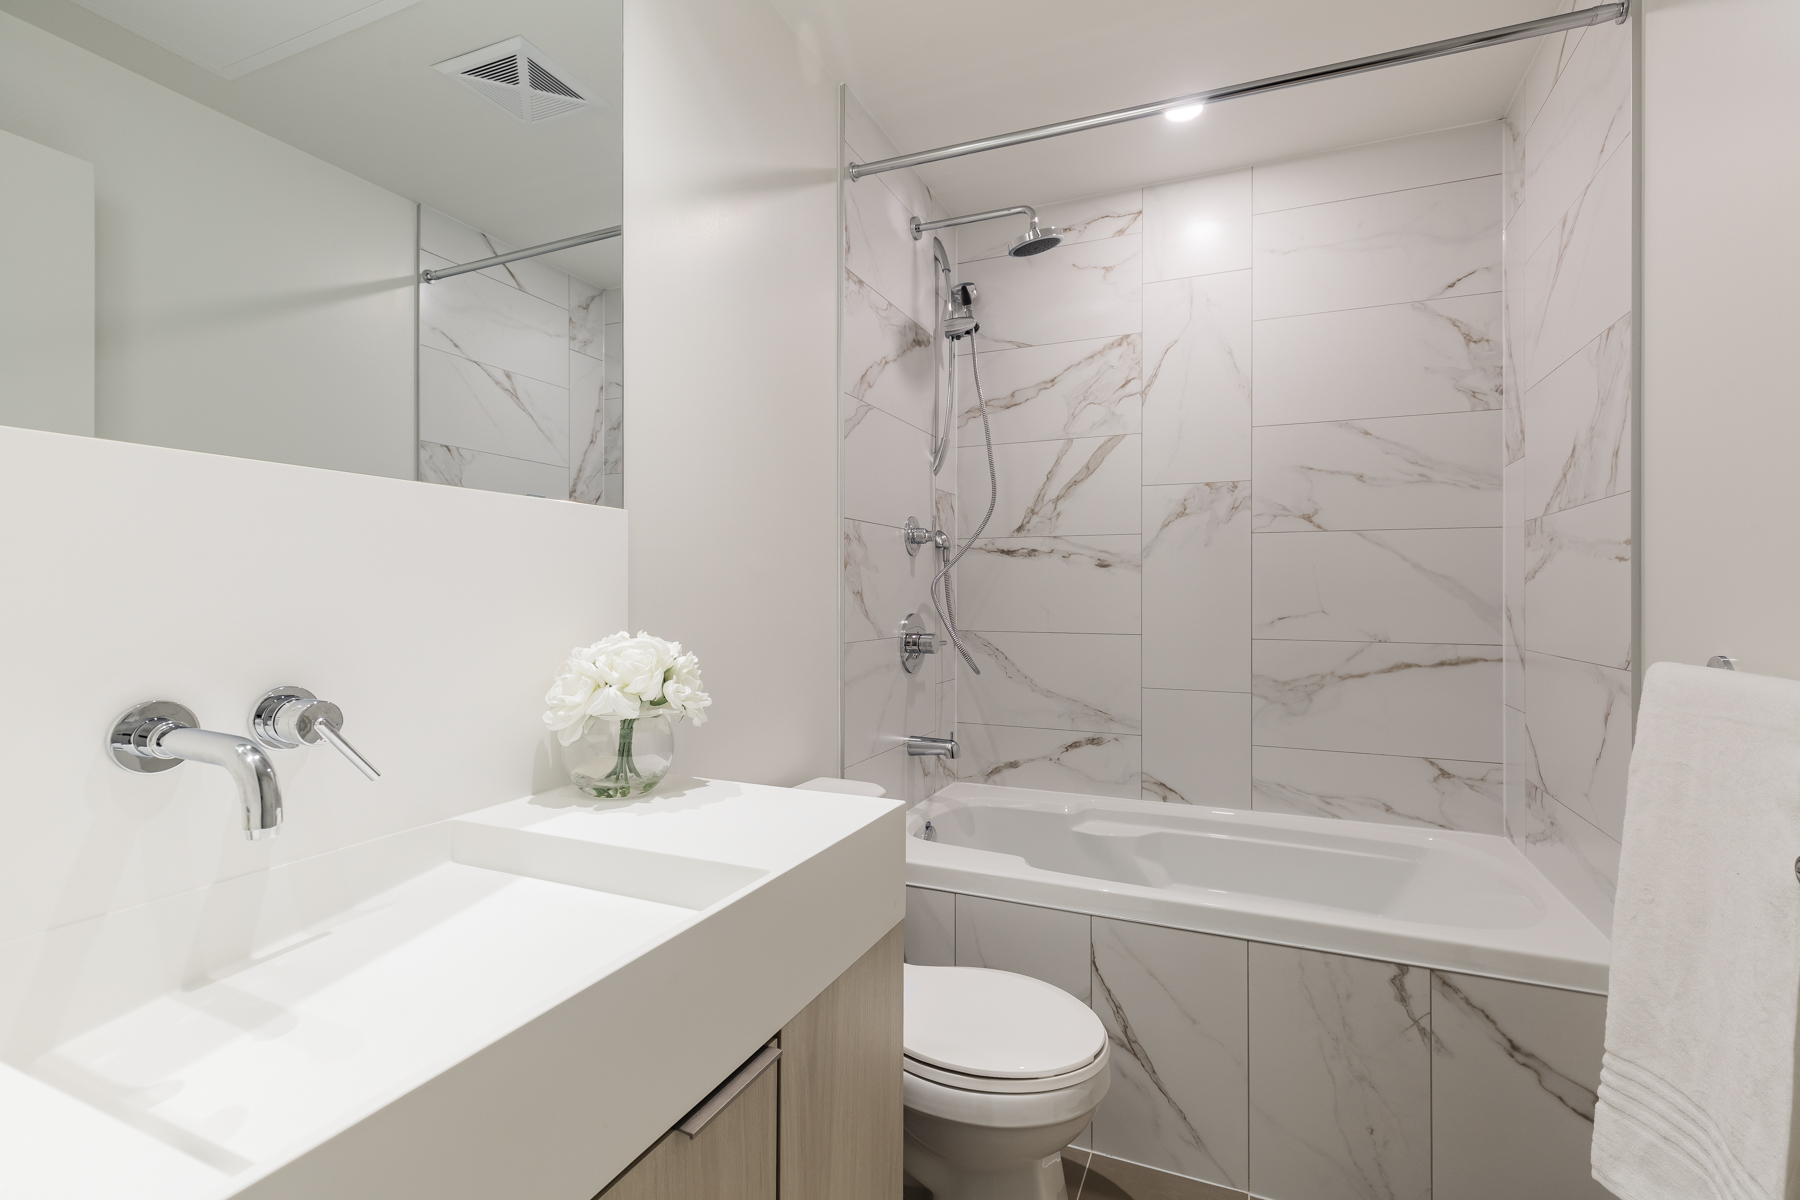 20 Richardson St Suite 3108 second bedroom with soaker tub and beautiful marble tiles.